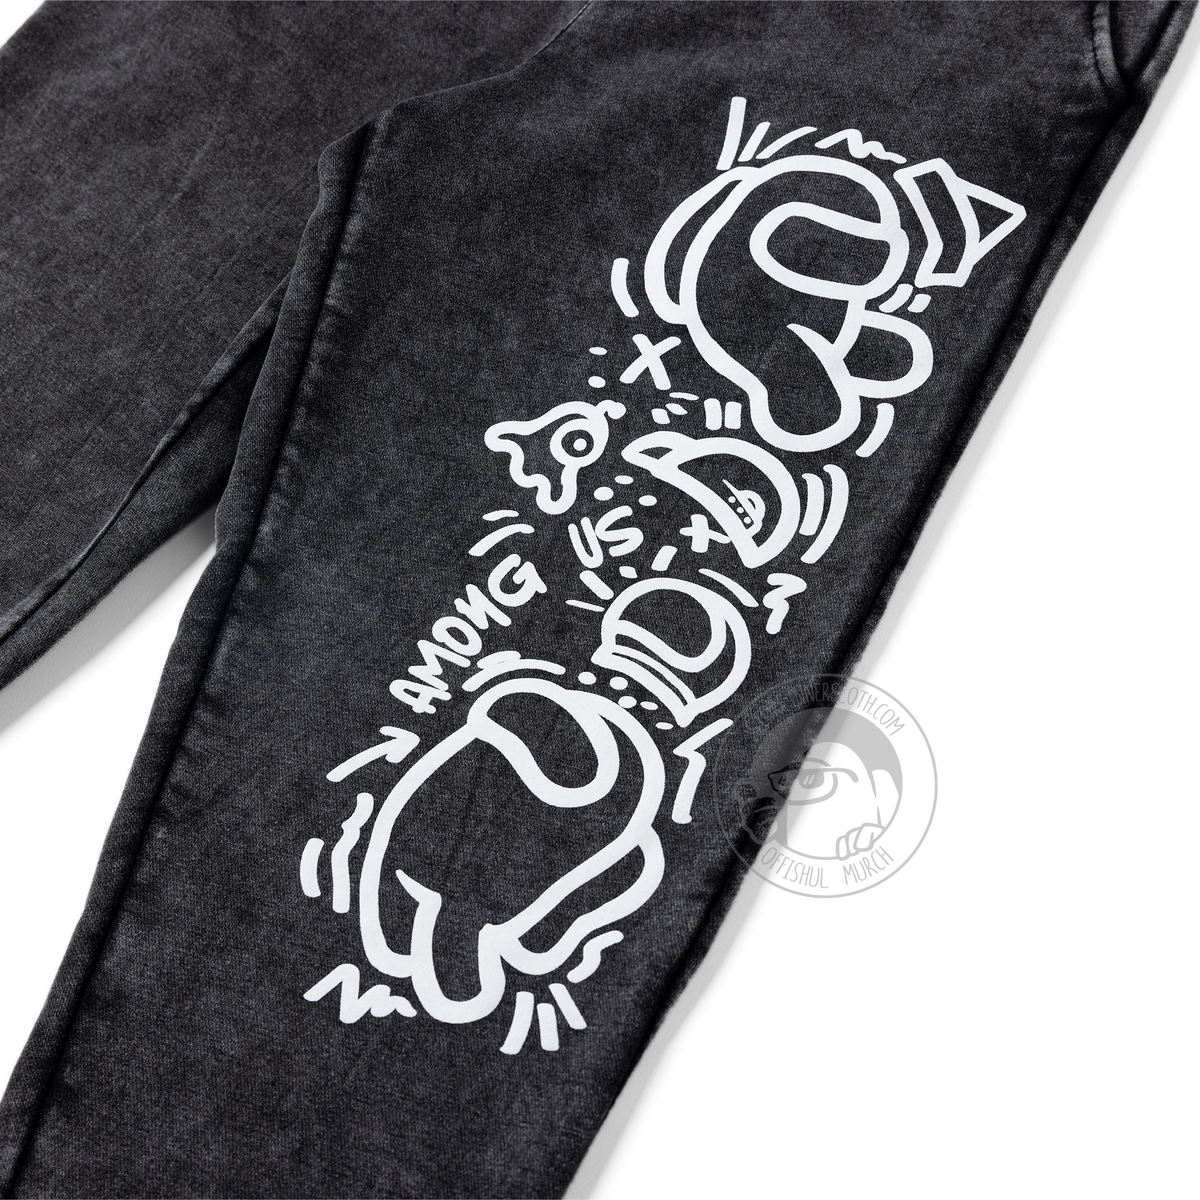 A flat lay product photograph of the front of the joggers at a ¾ angle tilting left. This image shows a close up of the front right pant leg screenprint detail.